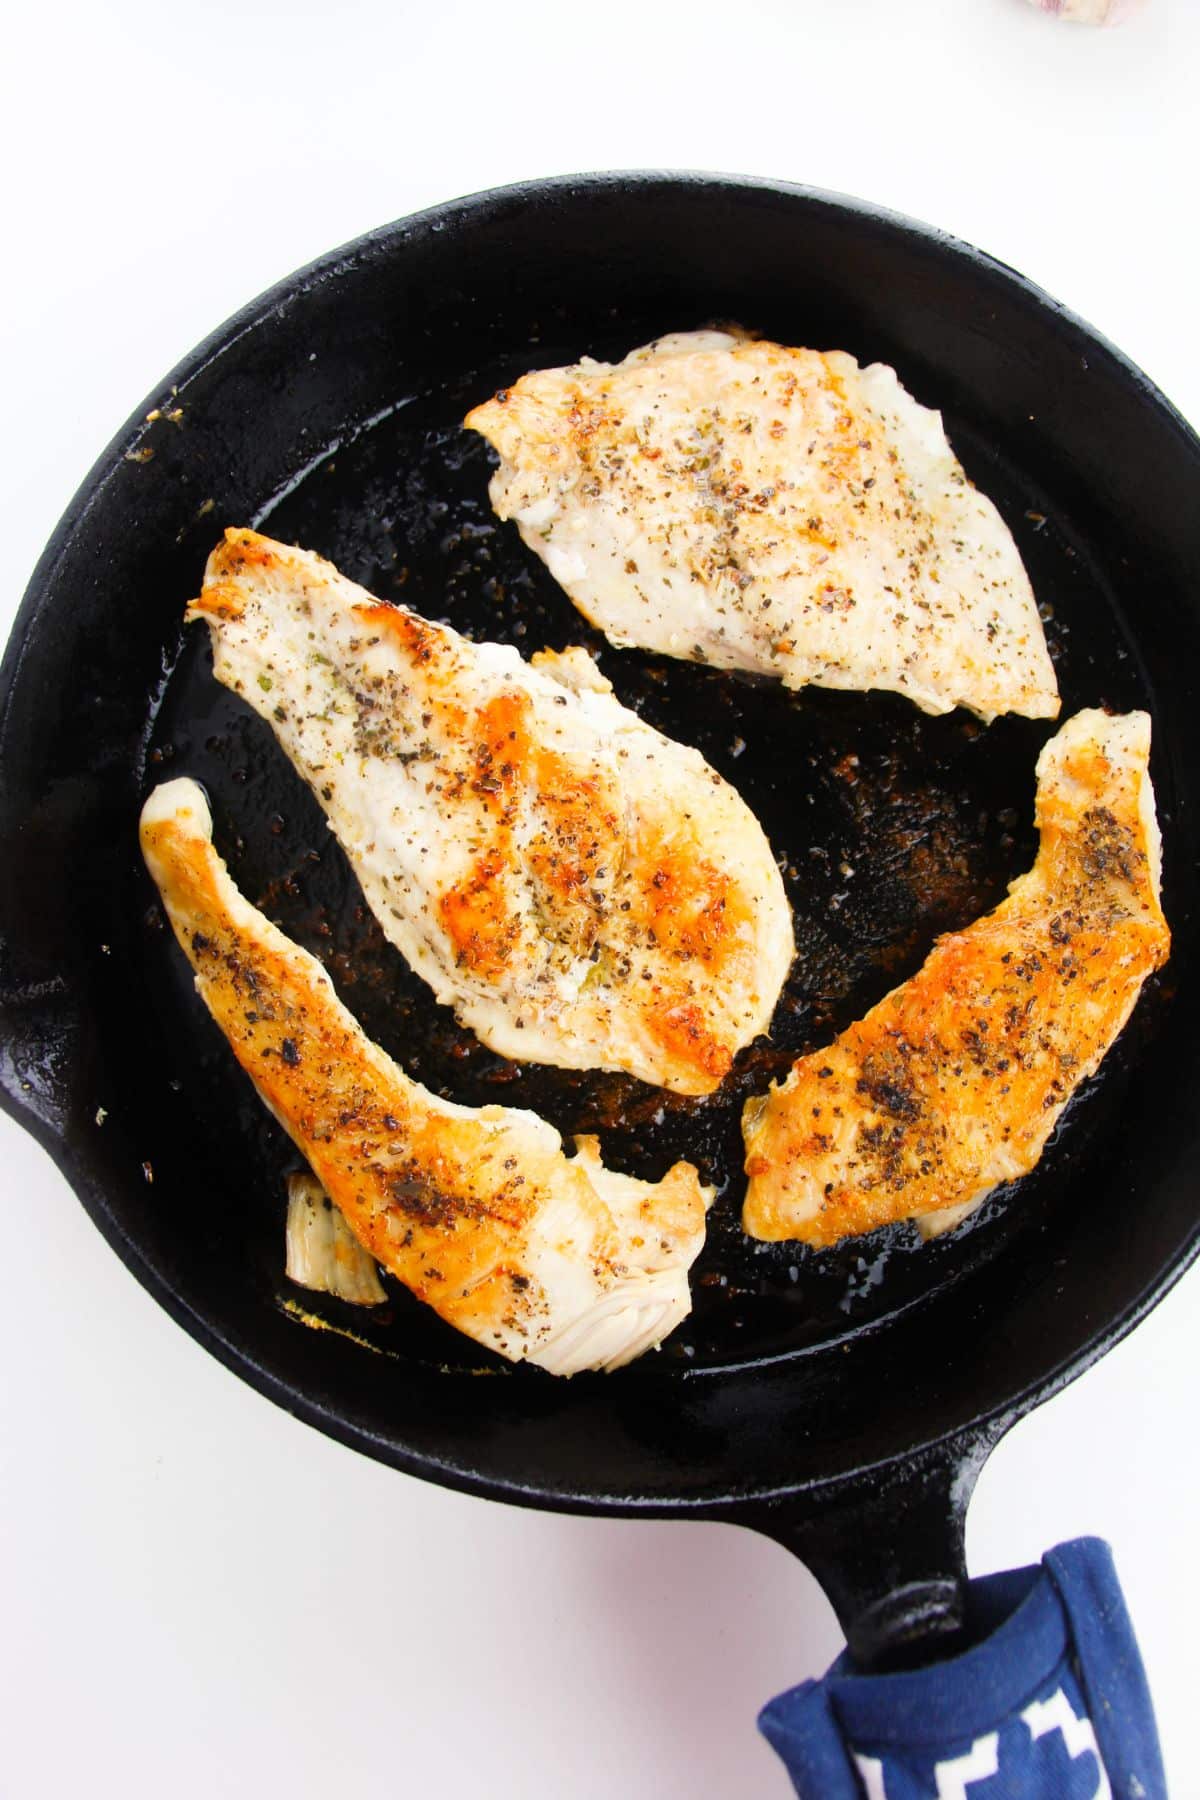 The chicken breasts are being seared in a skillet.